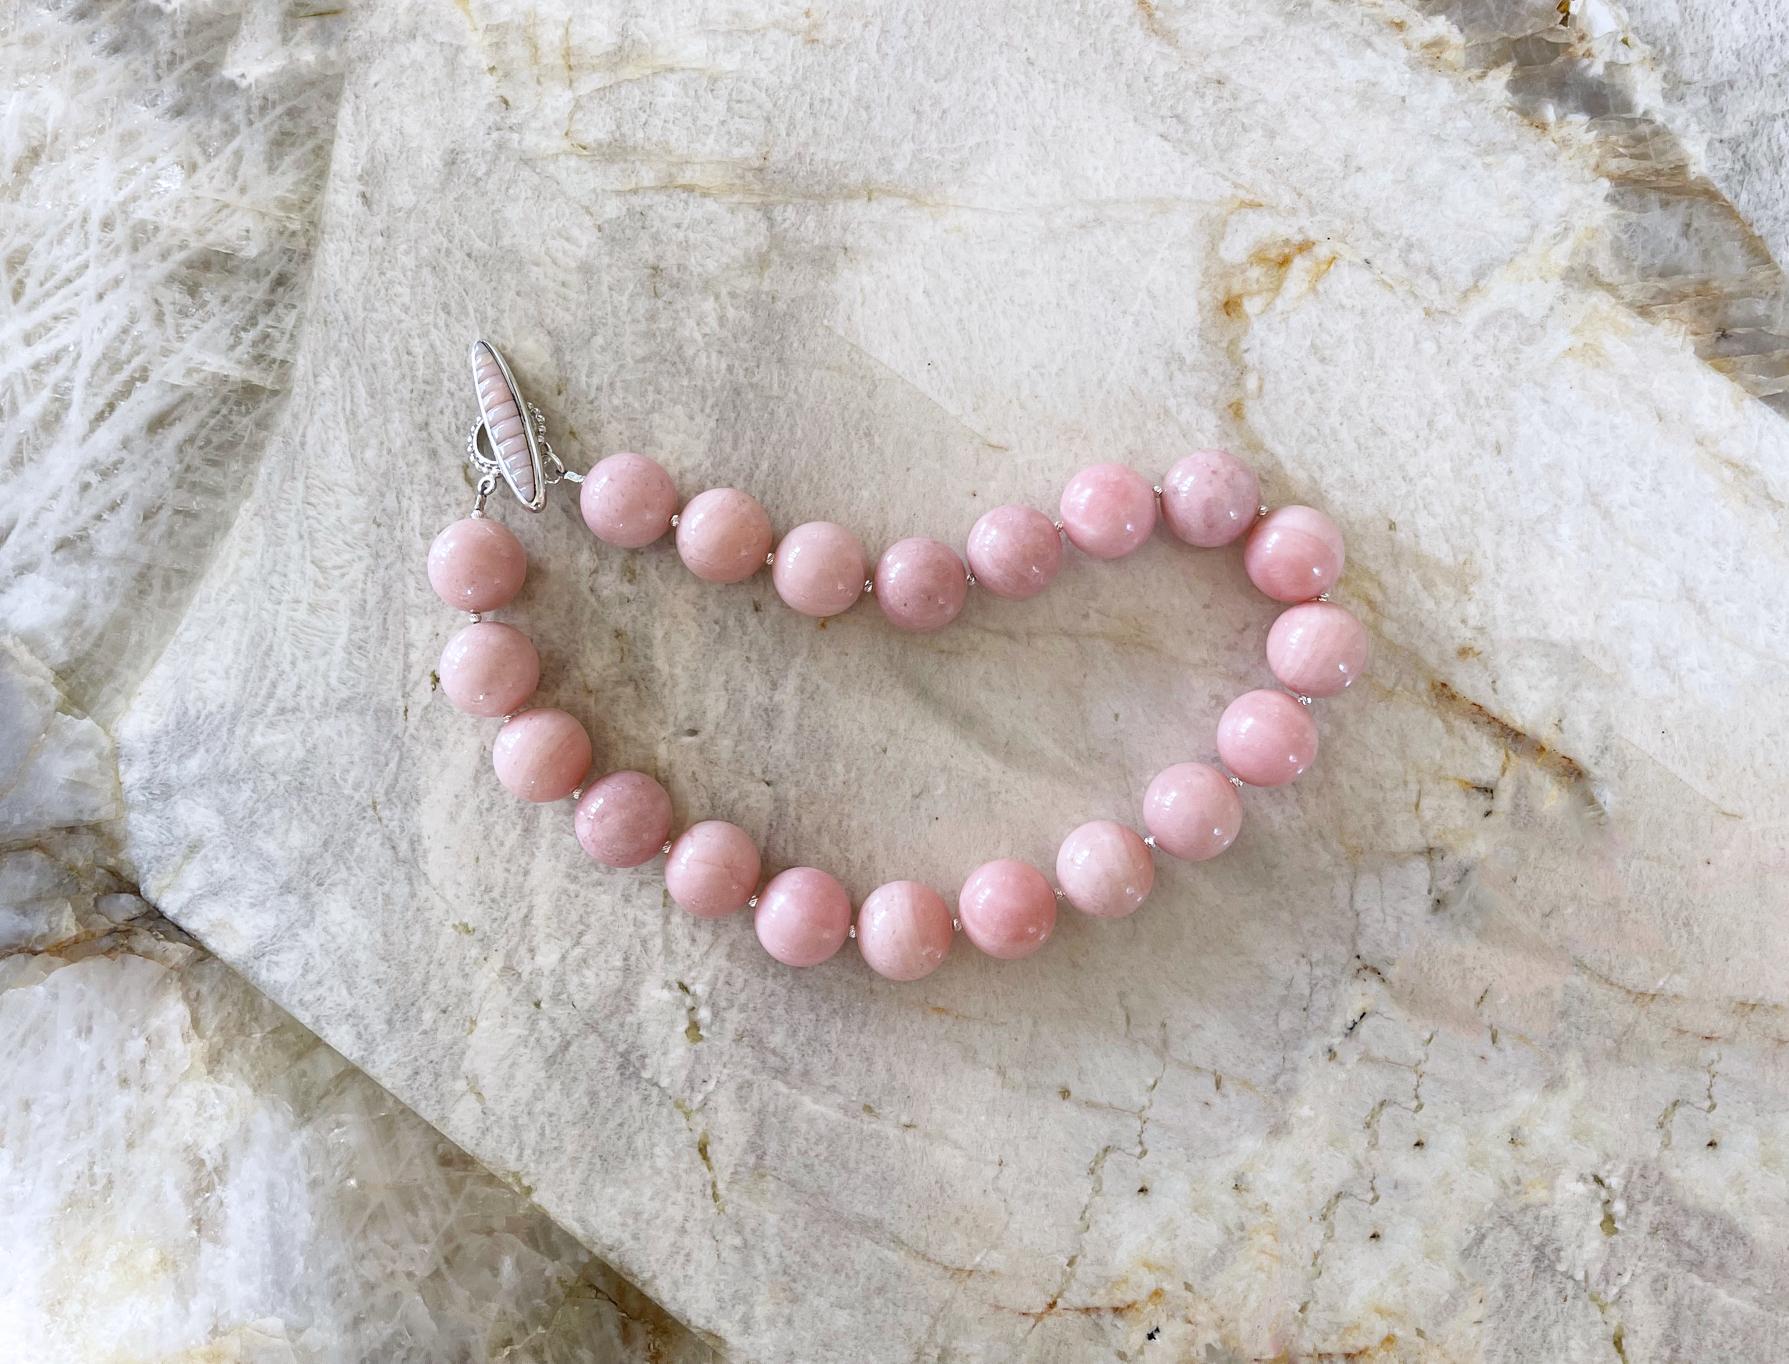 A top quality natural 20mm bubblegum pink Peruvian opal beaded necklace accented with tiny sterling silver beads and finished with a handmade sterling silver toggle clasp with coordinating pink mother of pearl inly. Handcrafted in the USA by Rocat